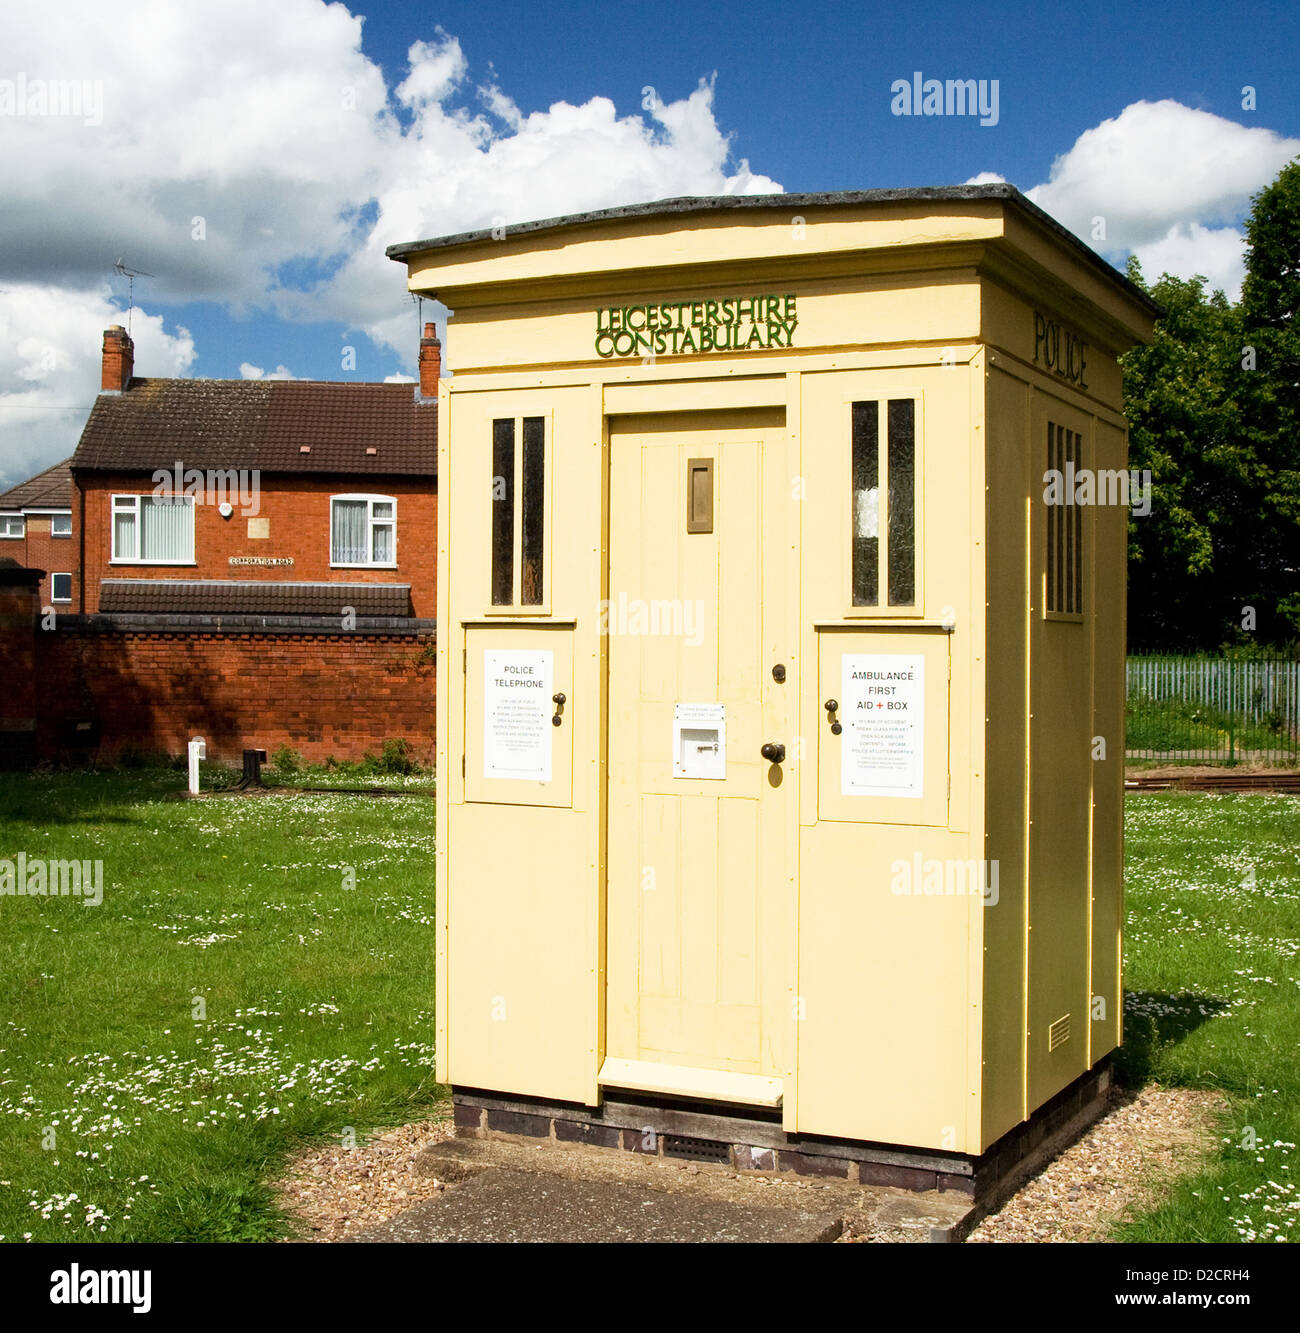 Leicestershire Constabulary Police Box. Foto Stock